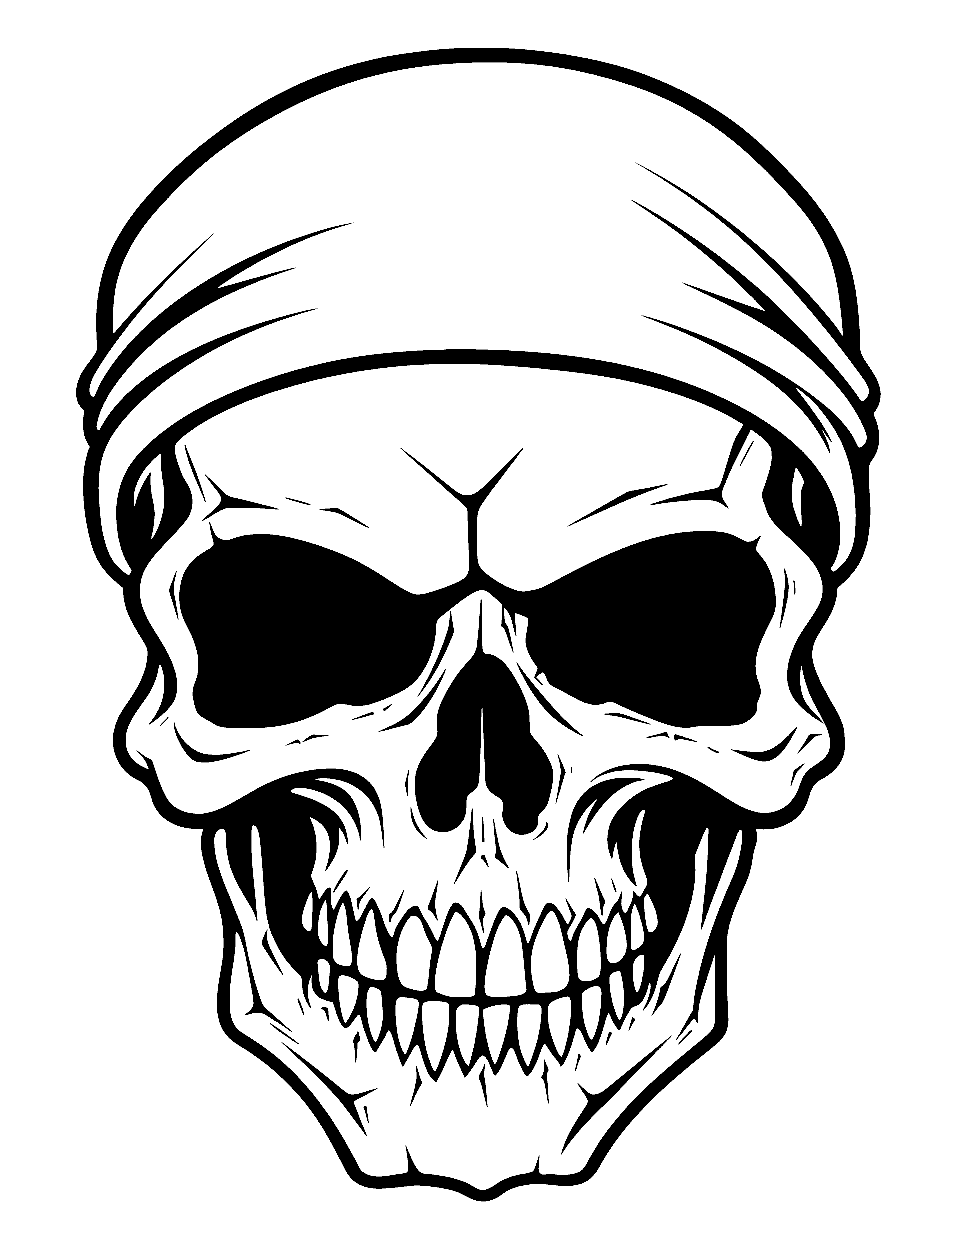 Pirate Skull Coloring Page - A skull wearing a pirate’s headband with a grimacing look.